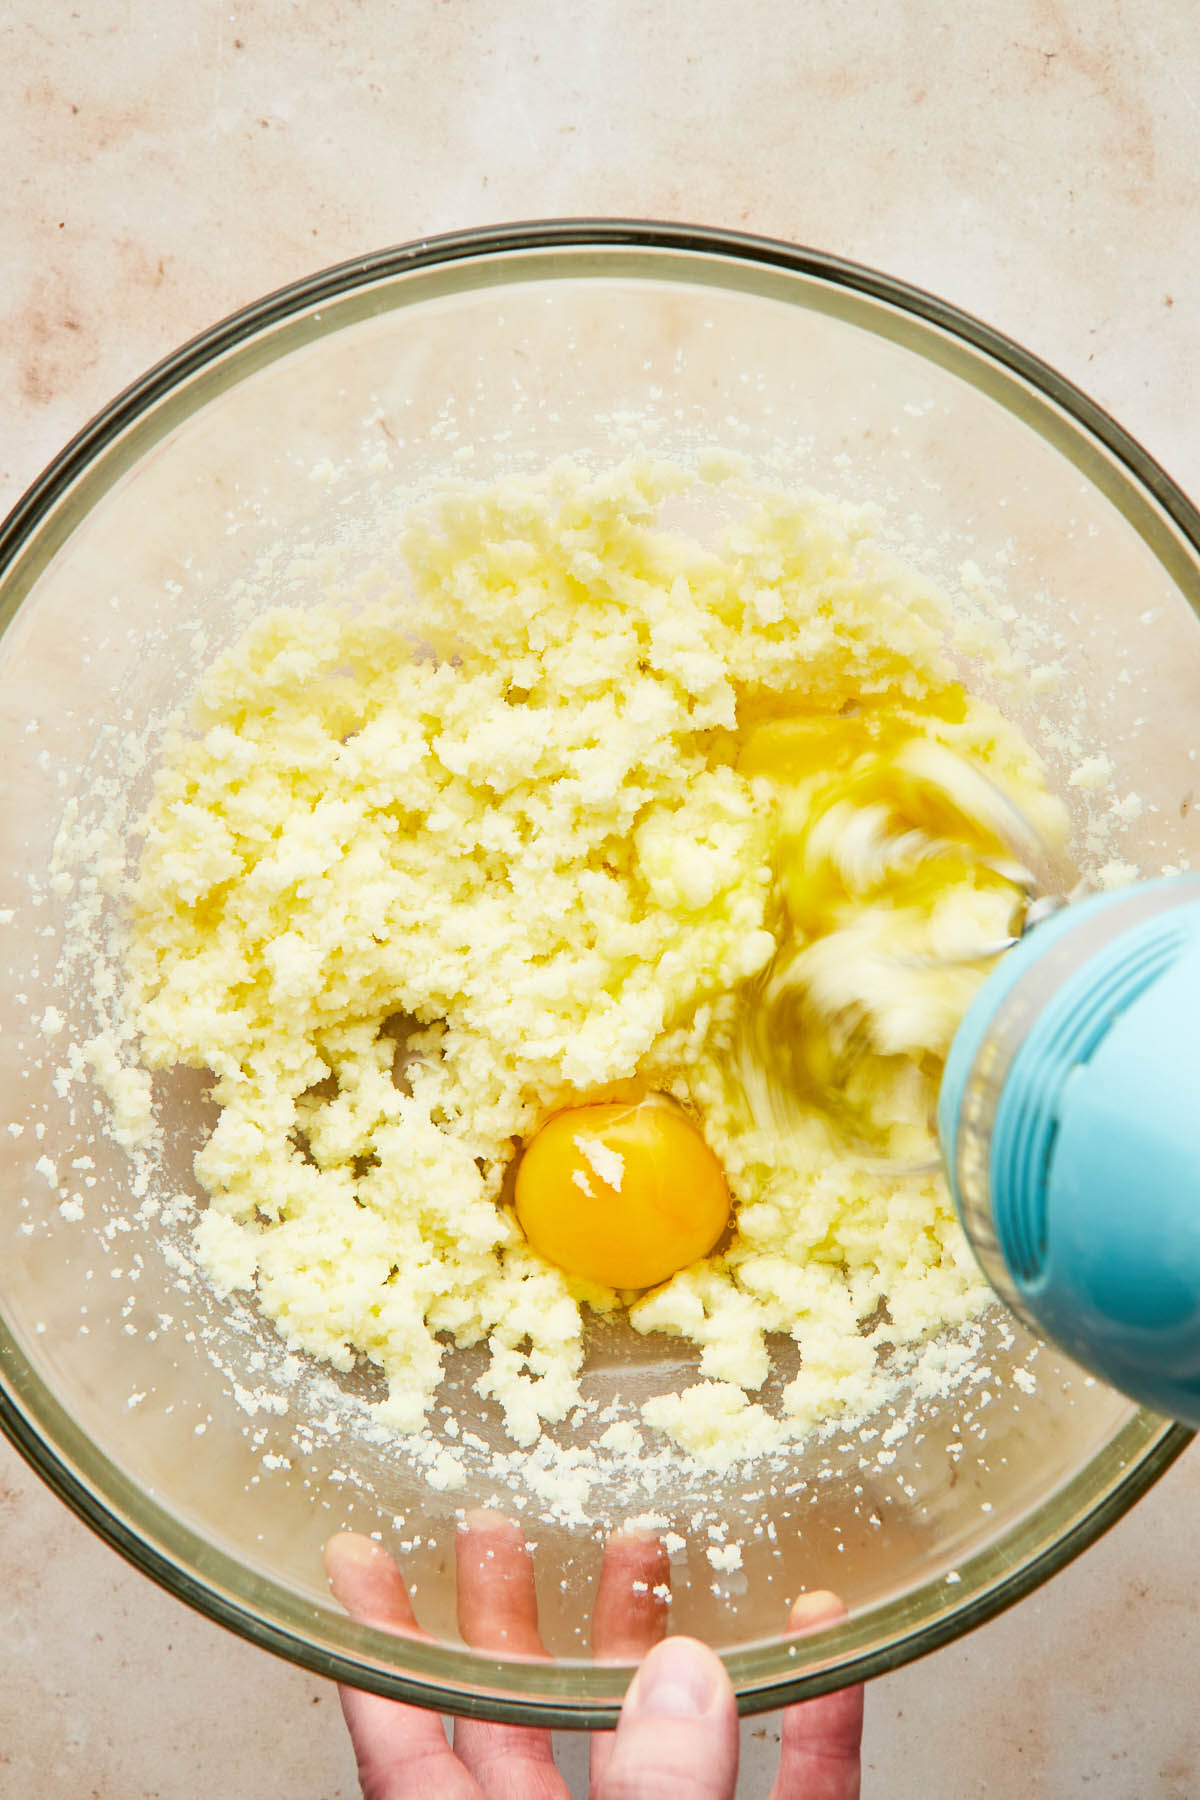 A hand using a hand mixer to beat eggs into creamed butter.